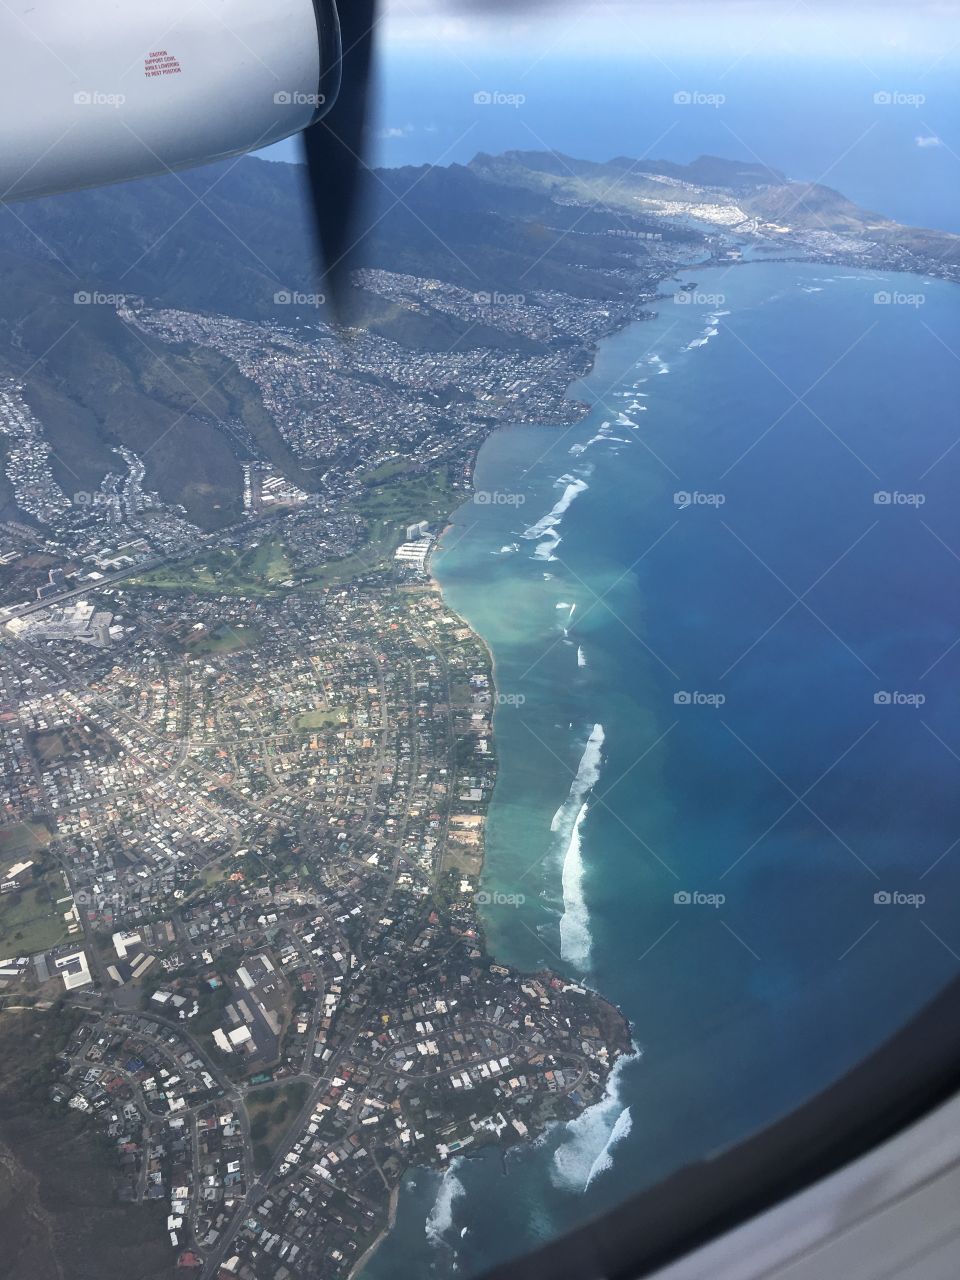 From a plane